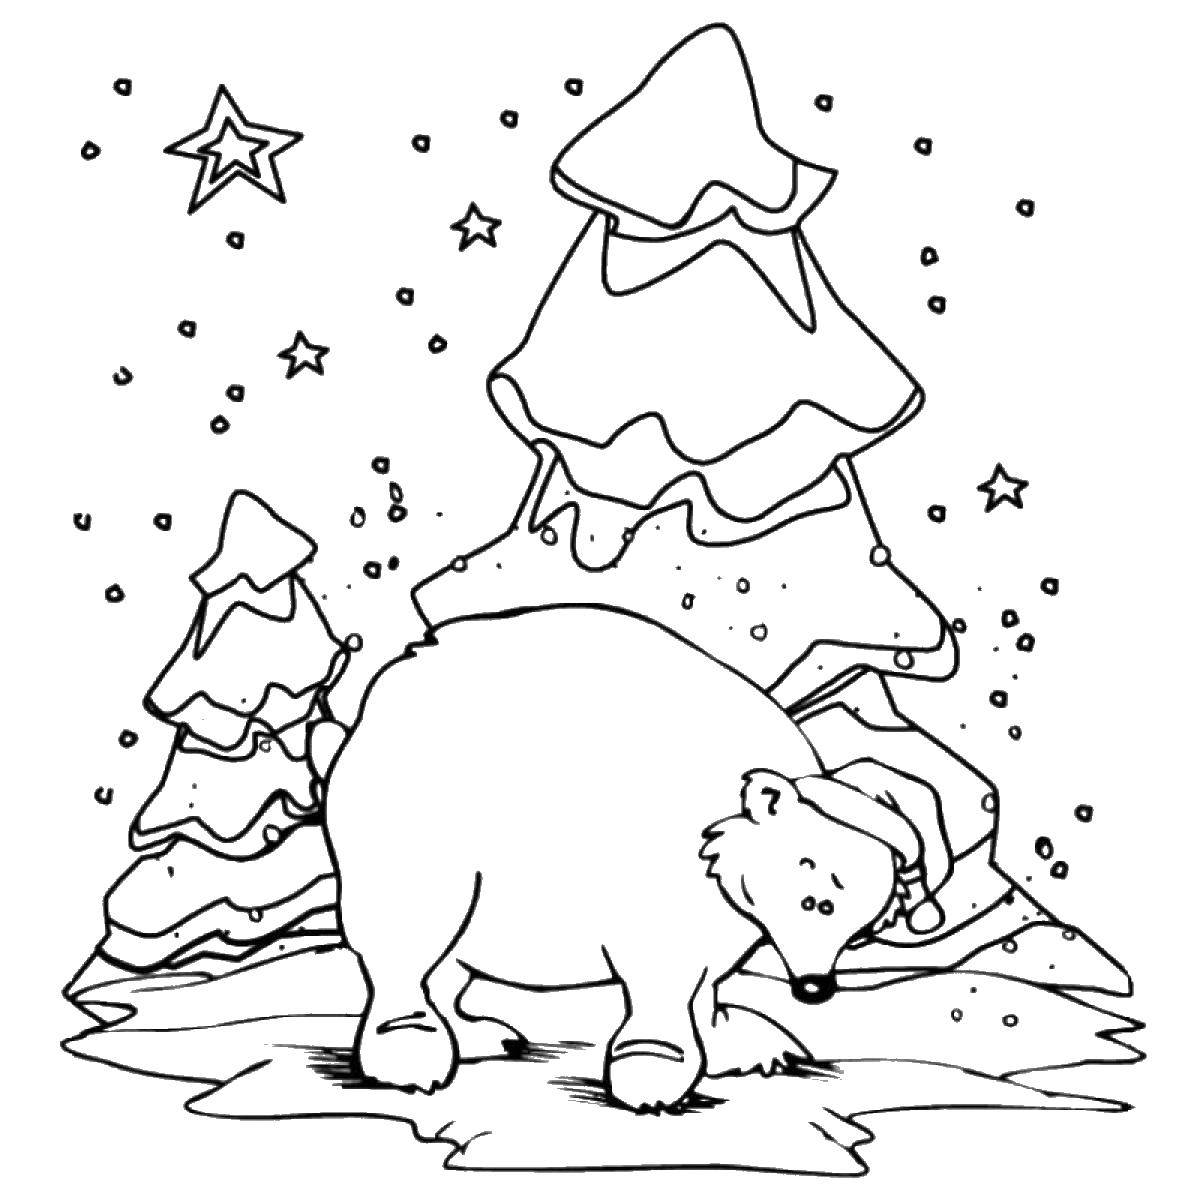 Coloring Bear in winter in front of Christmas tree. Category Animals. Tags:  bear .